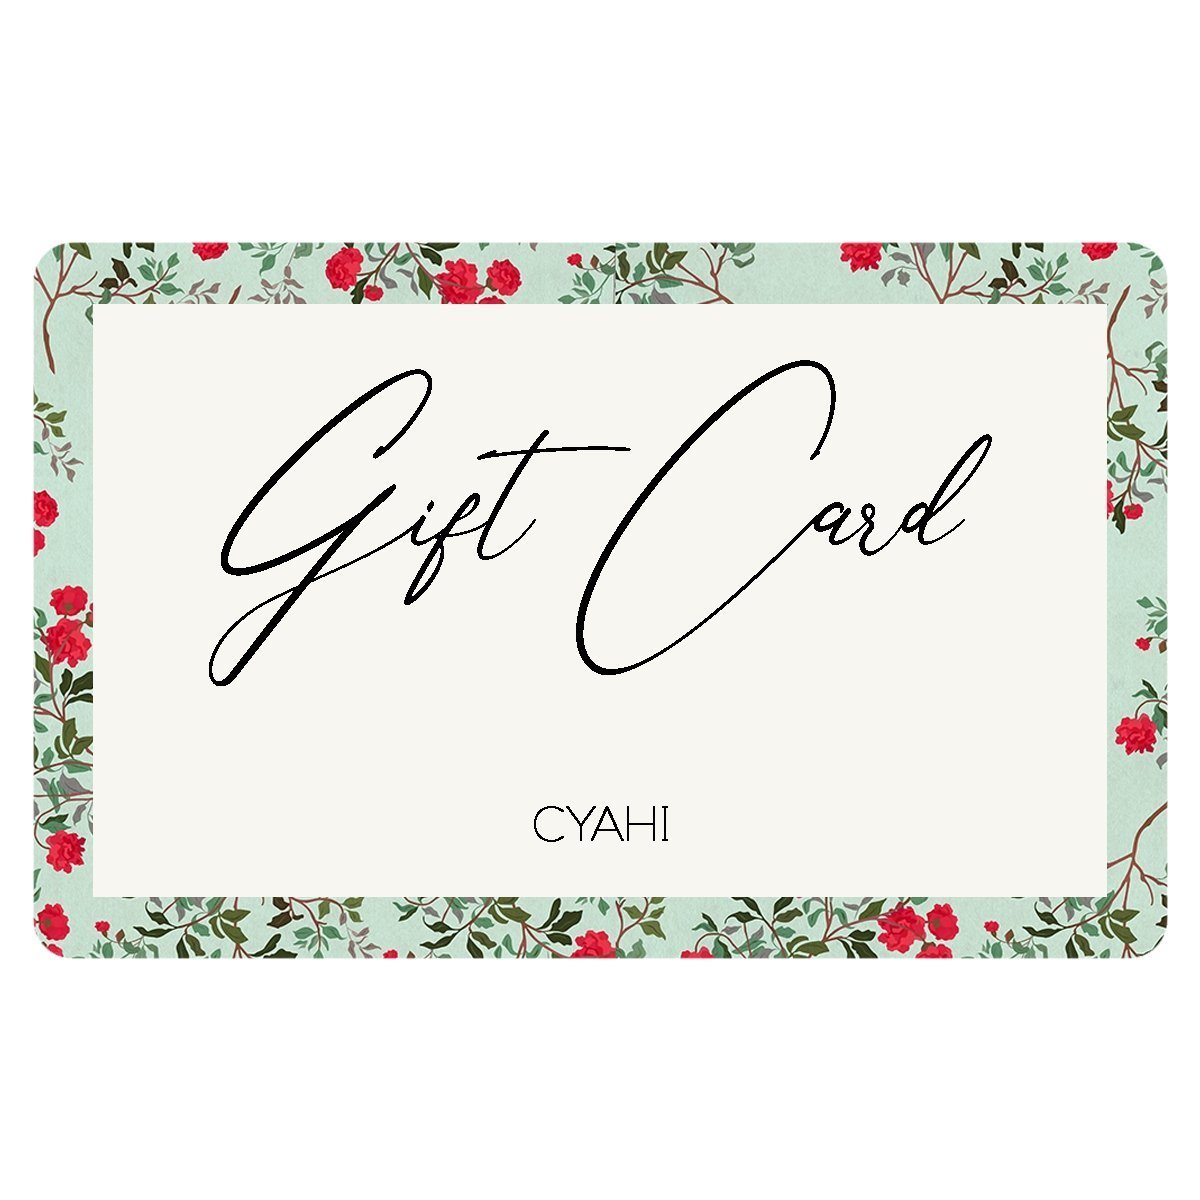 The do's and don'ts of gift cards